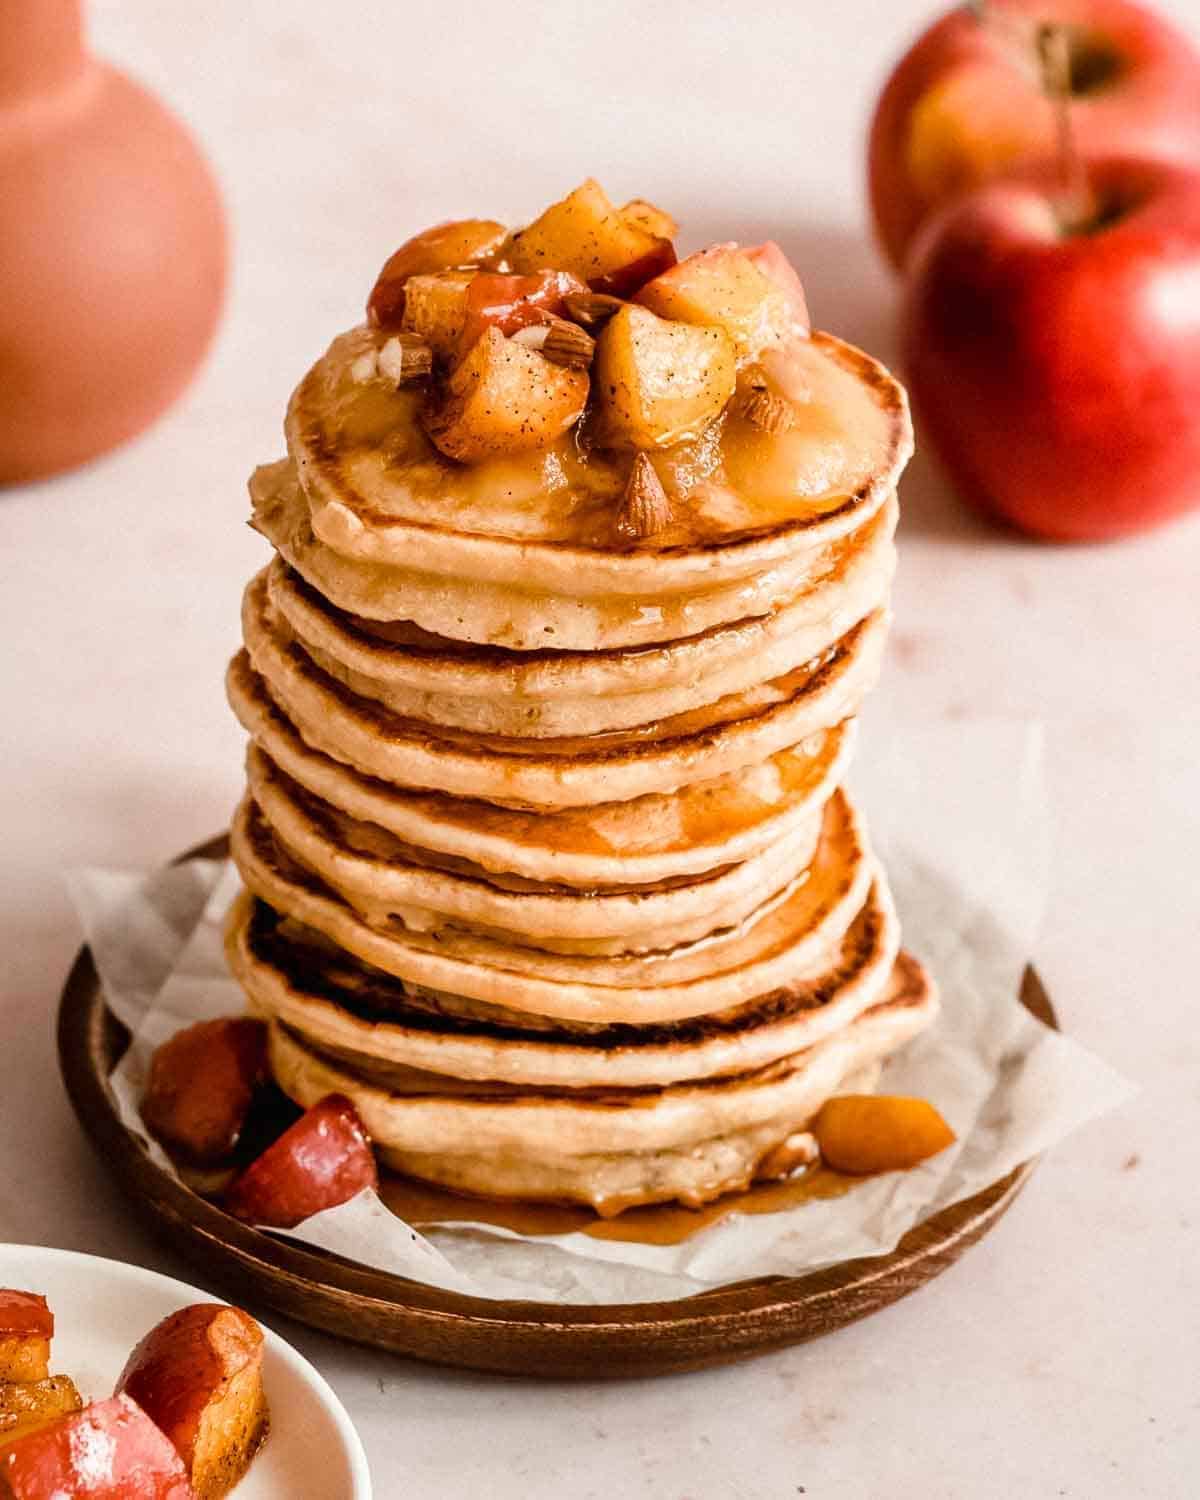 Stack of pancakes topped with chopped apples and some apples on the side.